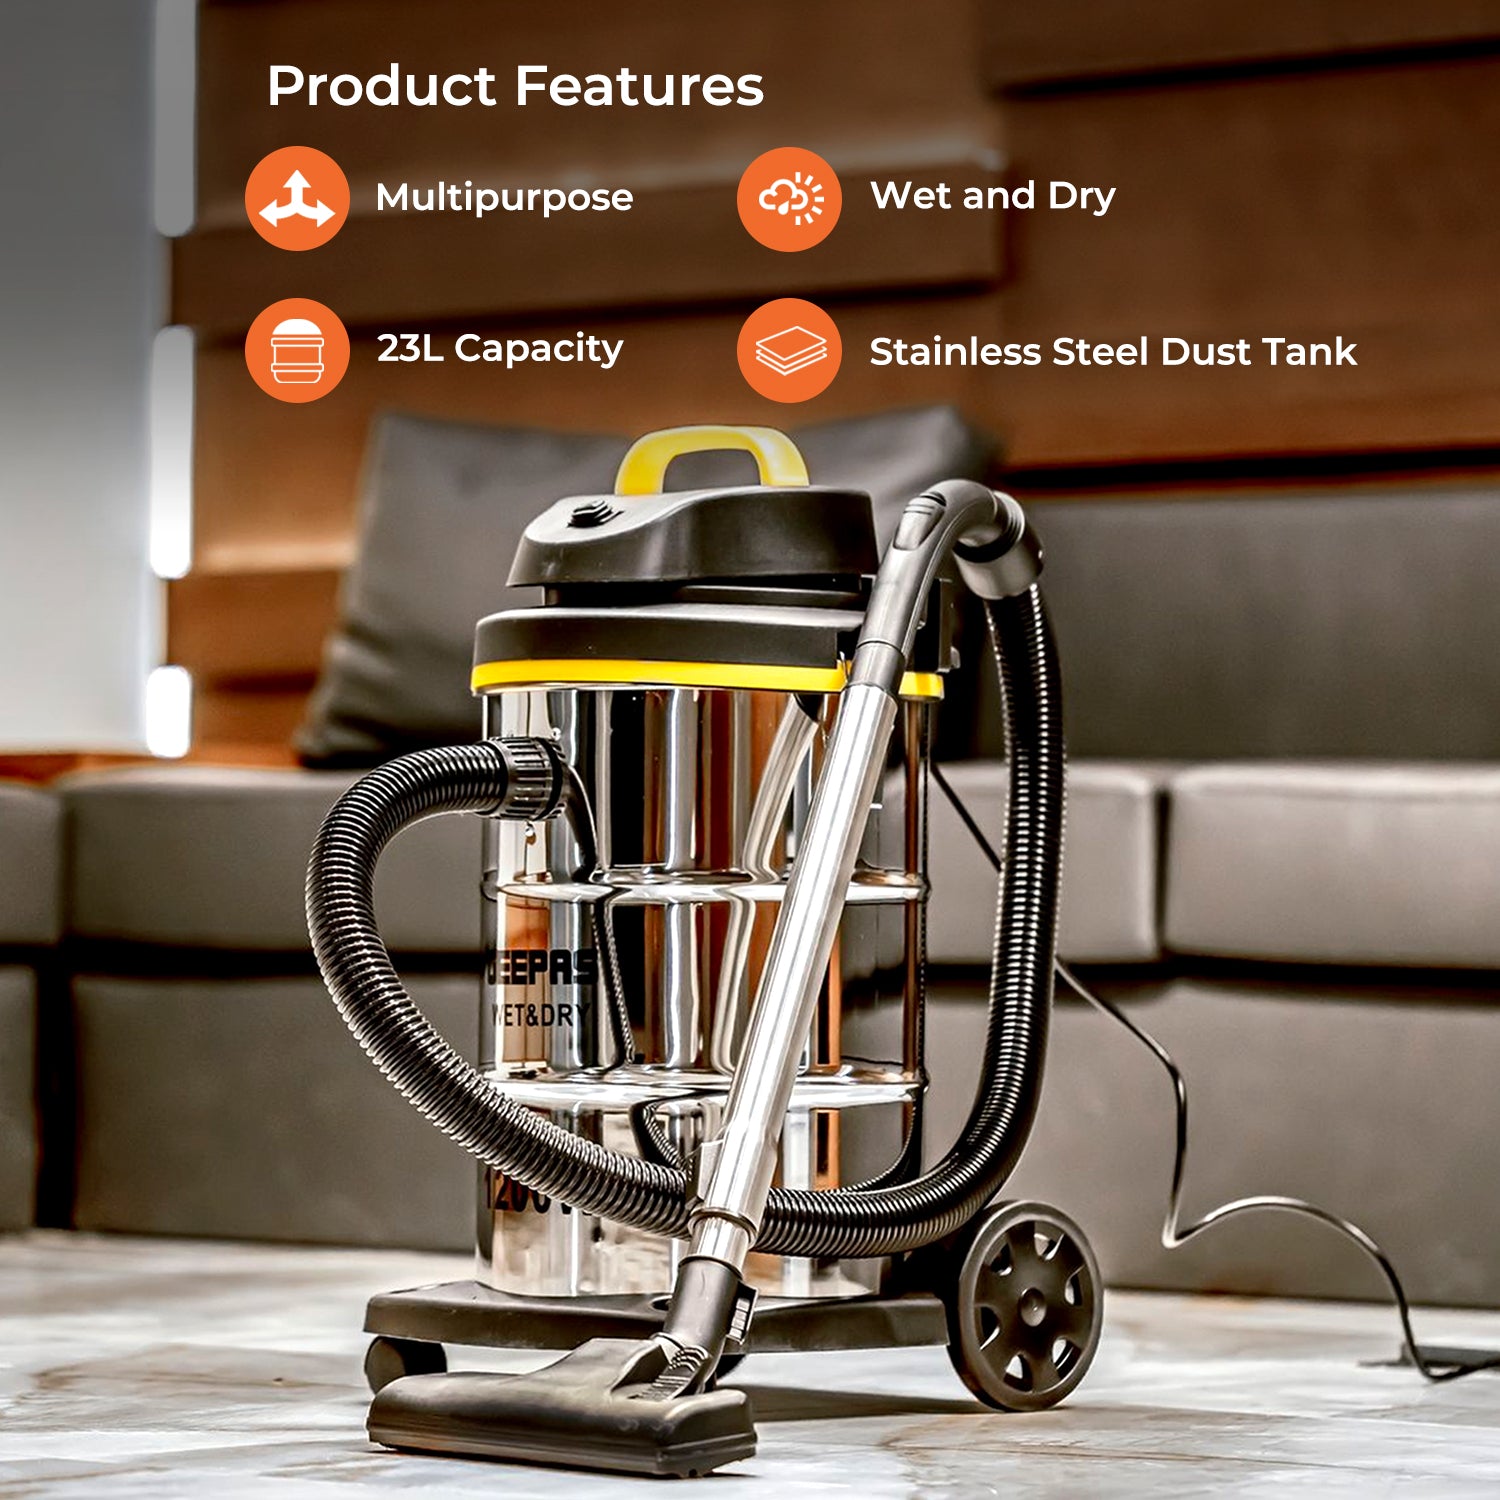 Geepas | For you. For life. Heavy Duty Wet & Dry Vacuum Cleaner Vacuum Cleaner